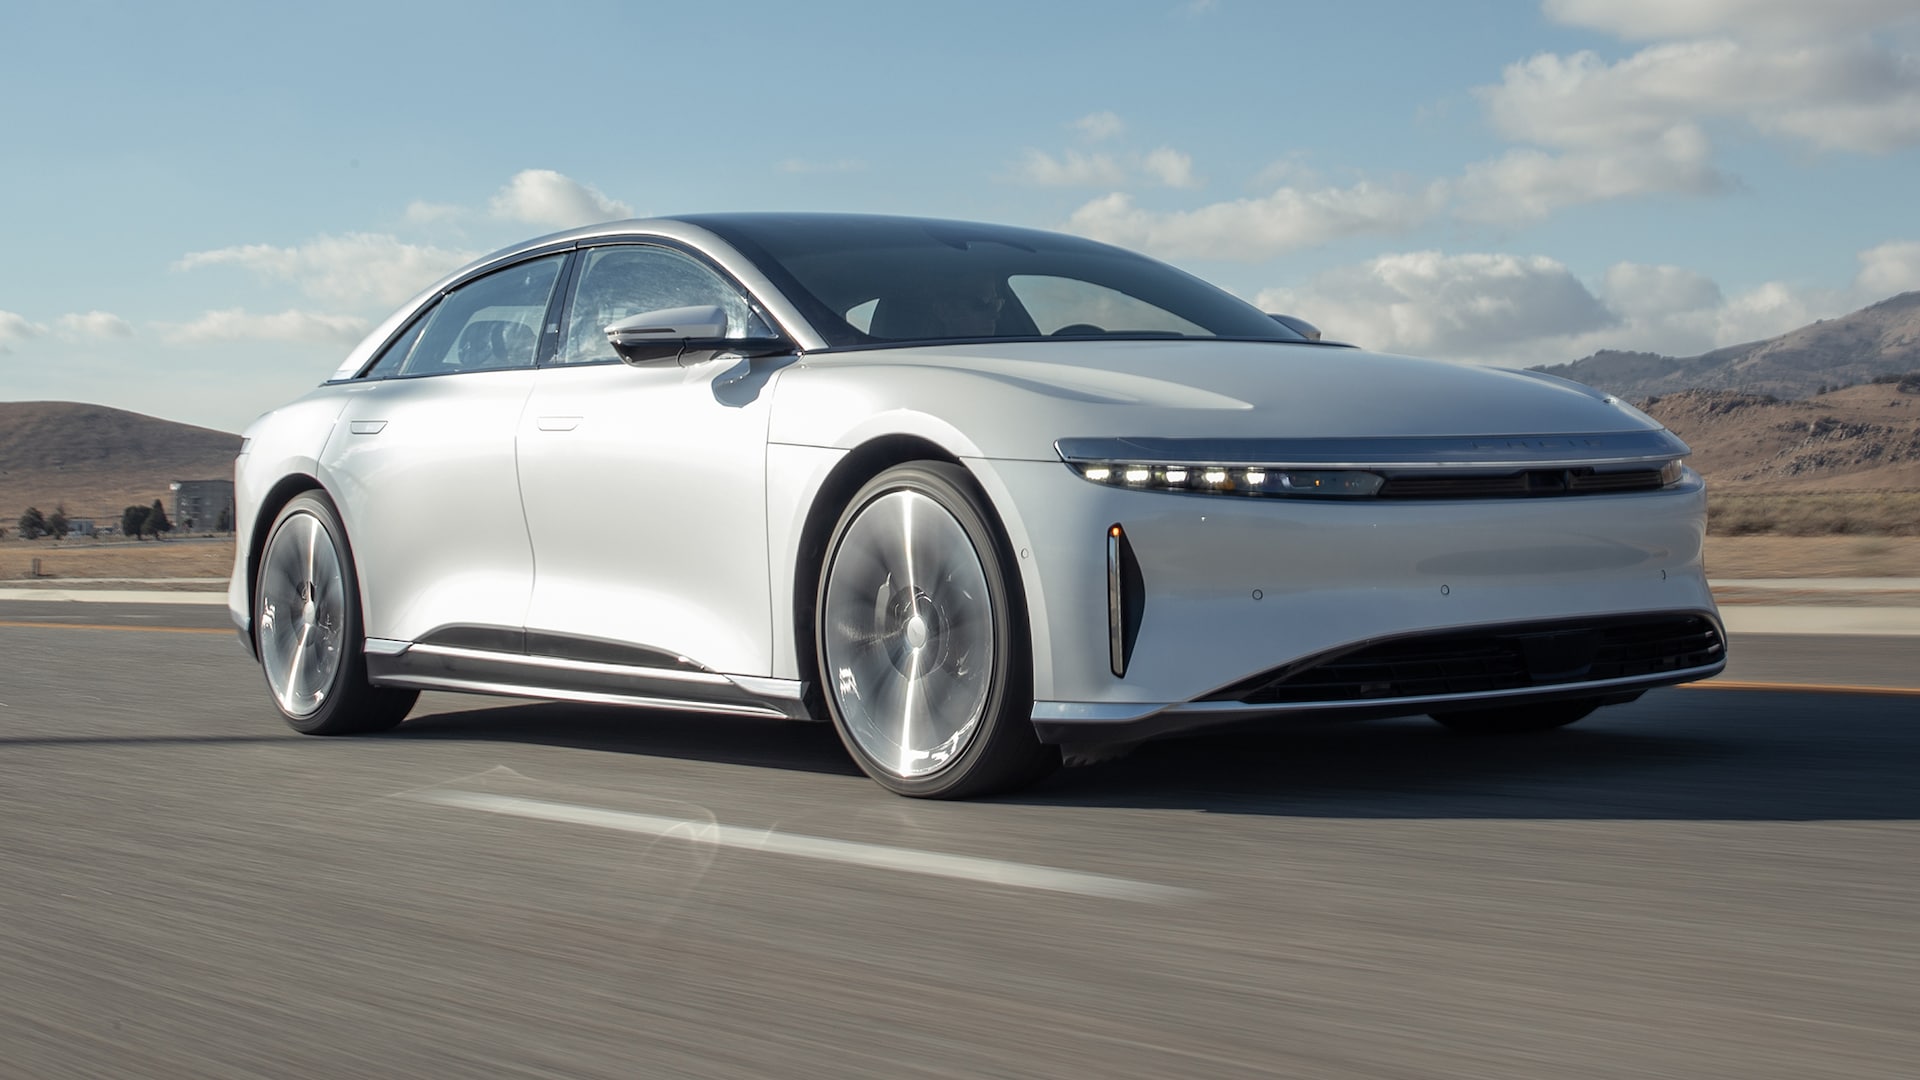 2022 Lucid Air Prices, Reviews, and Photos - MotorTrend